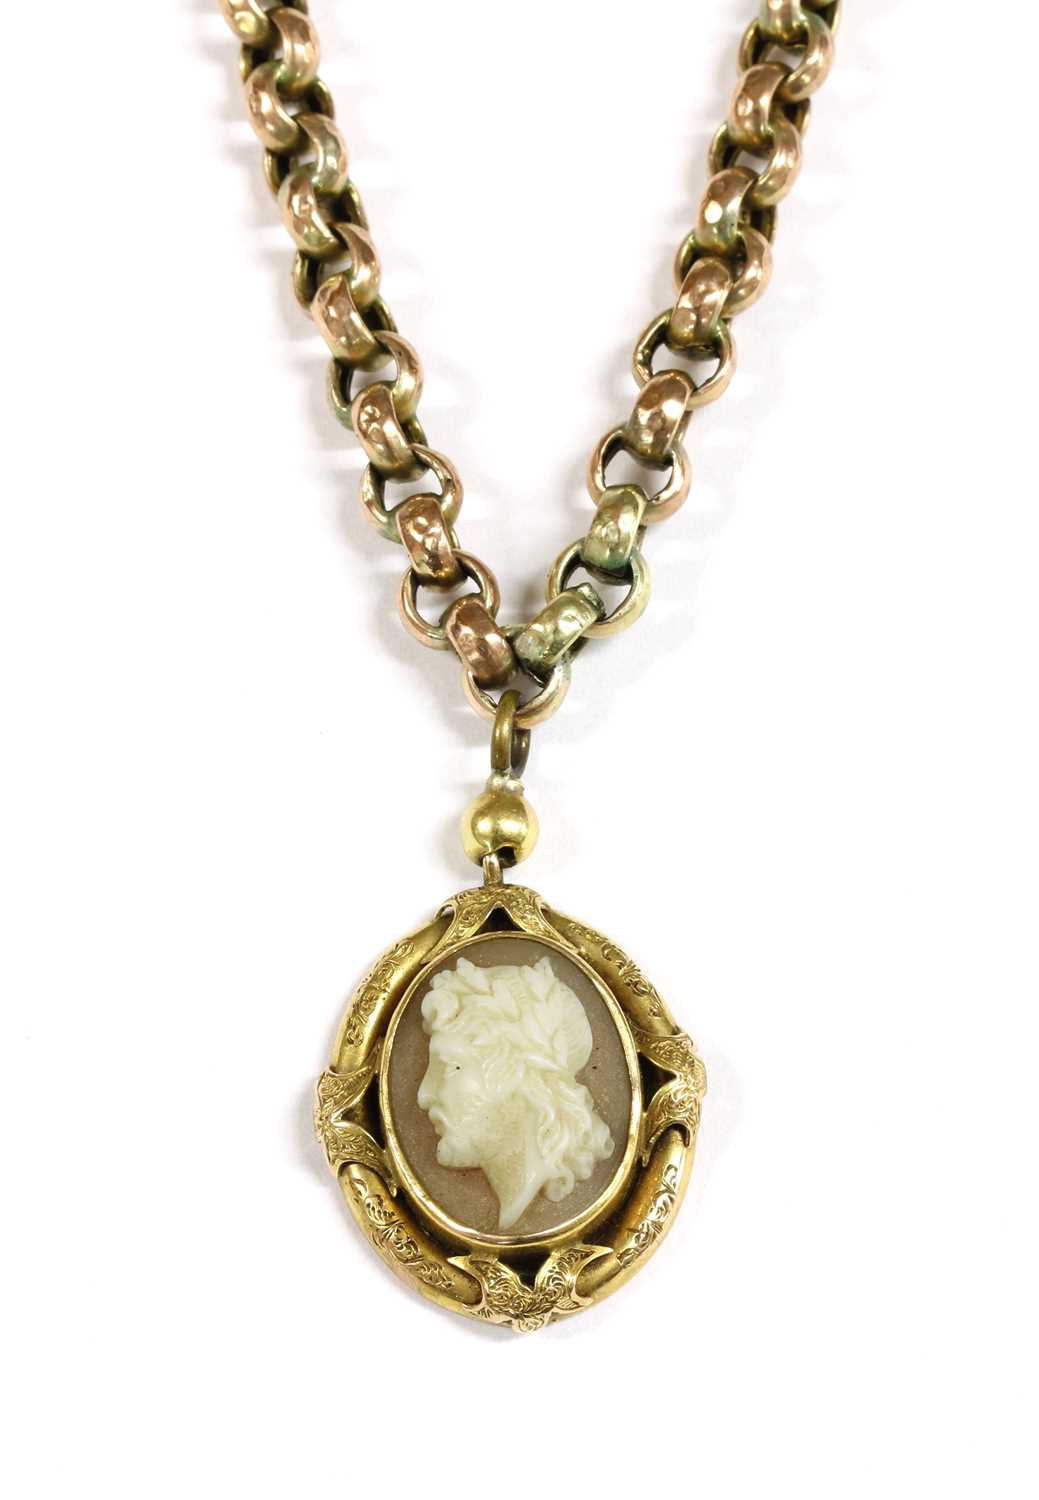 A gold mounted shell cameo pendant,